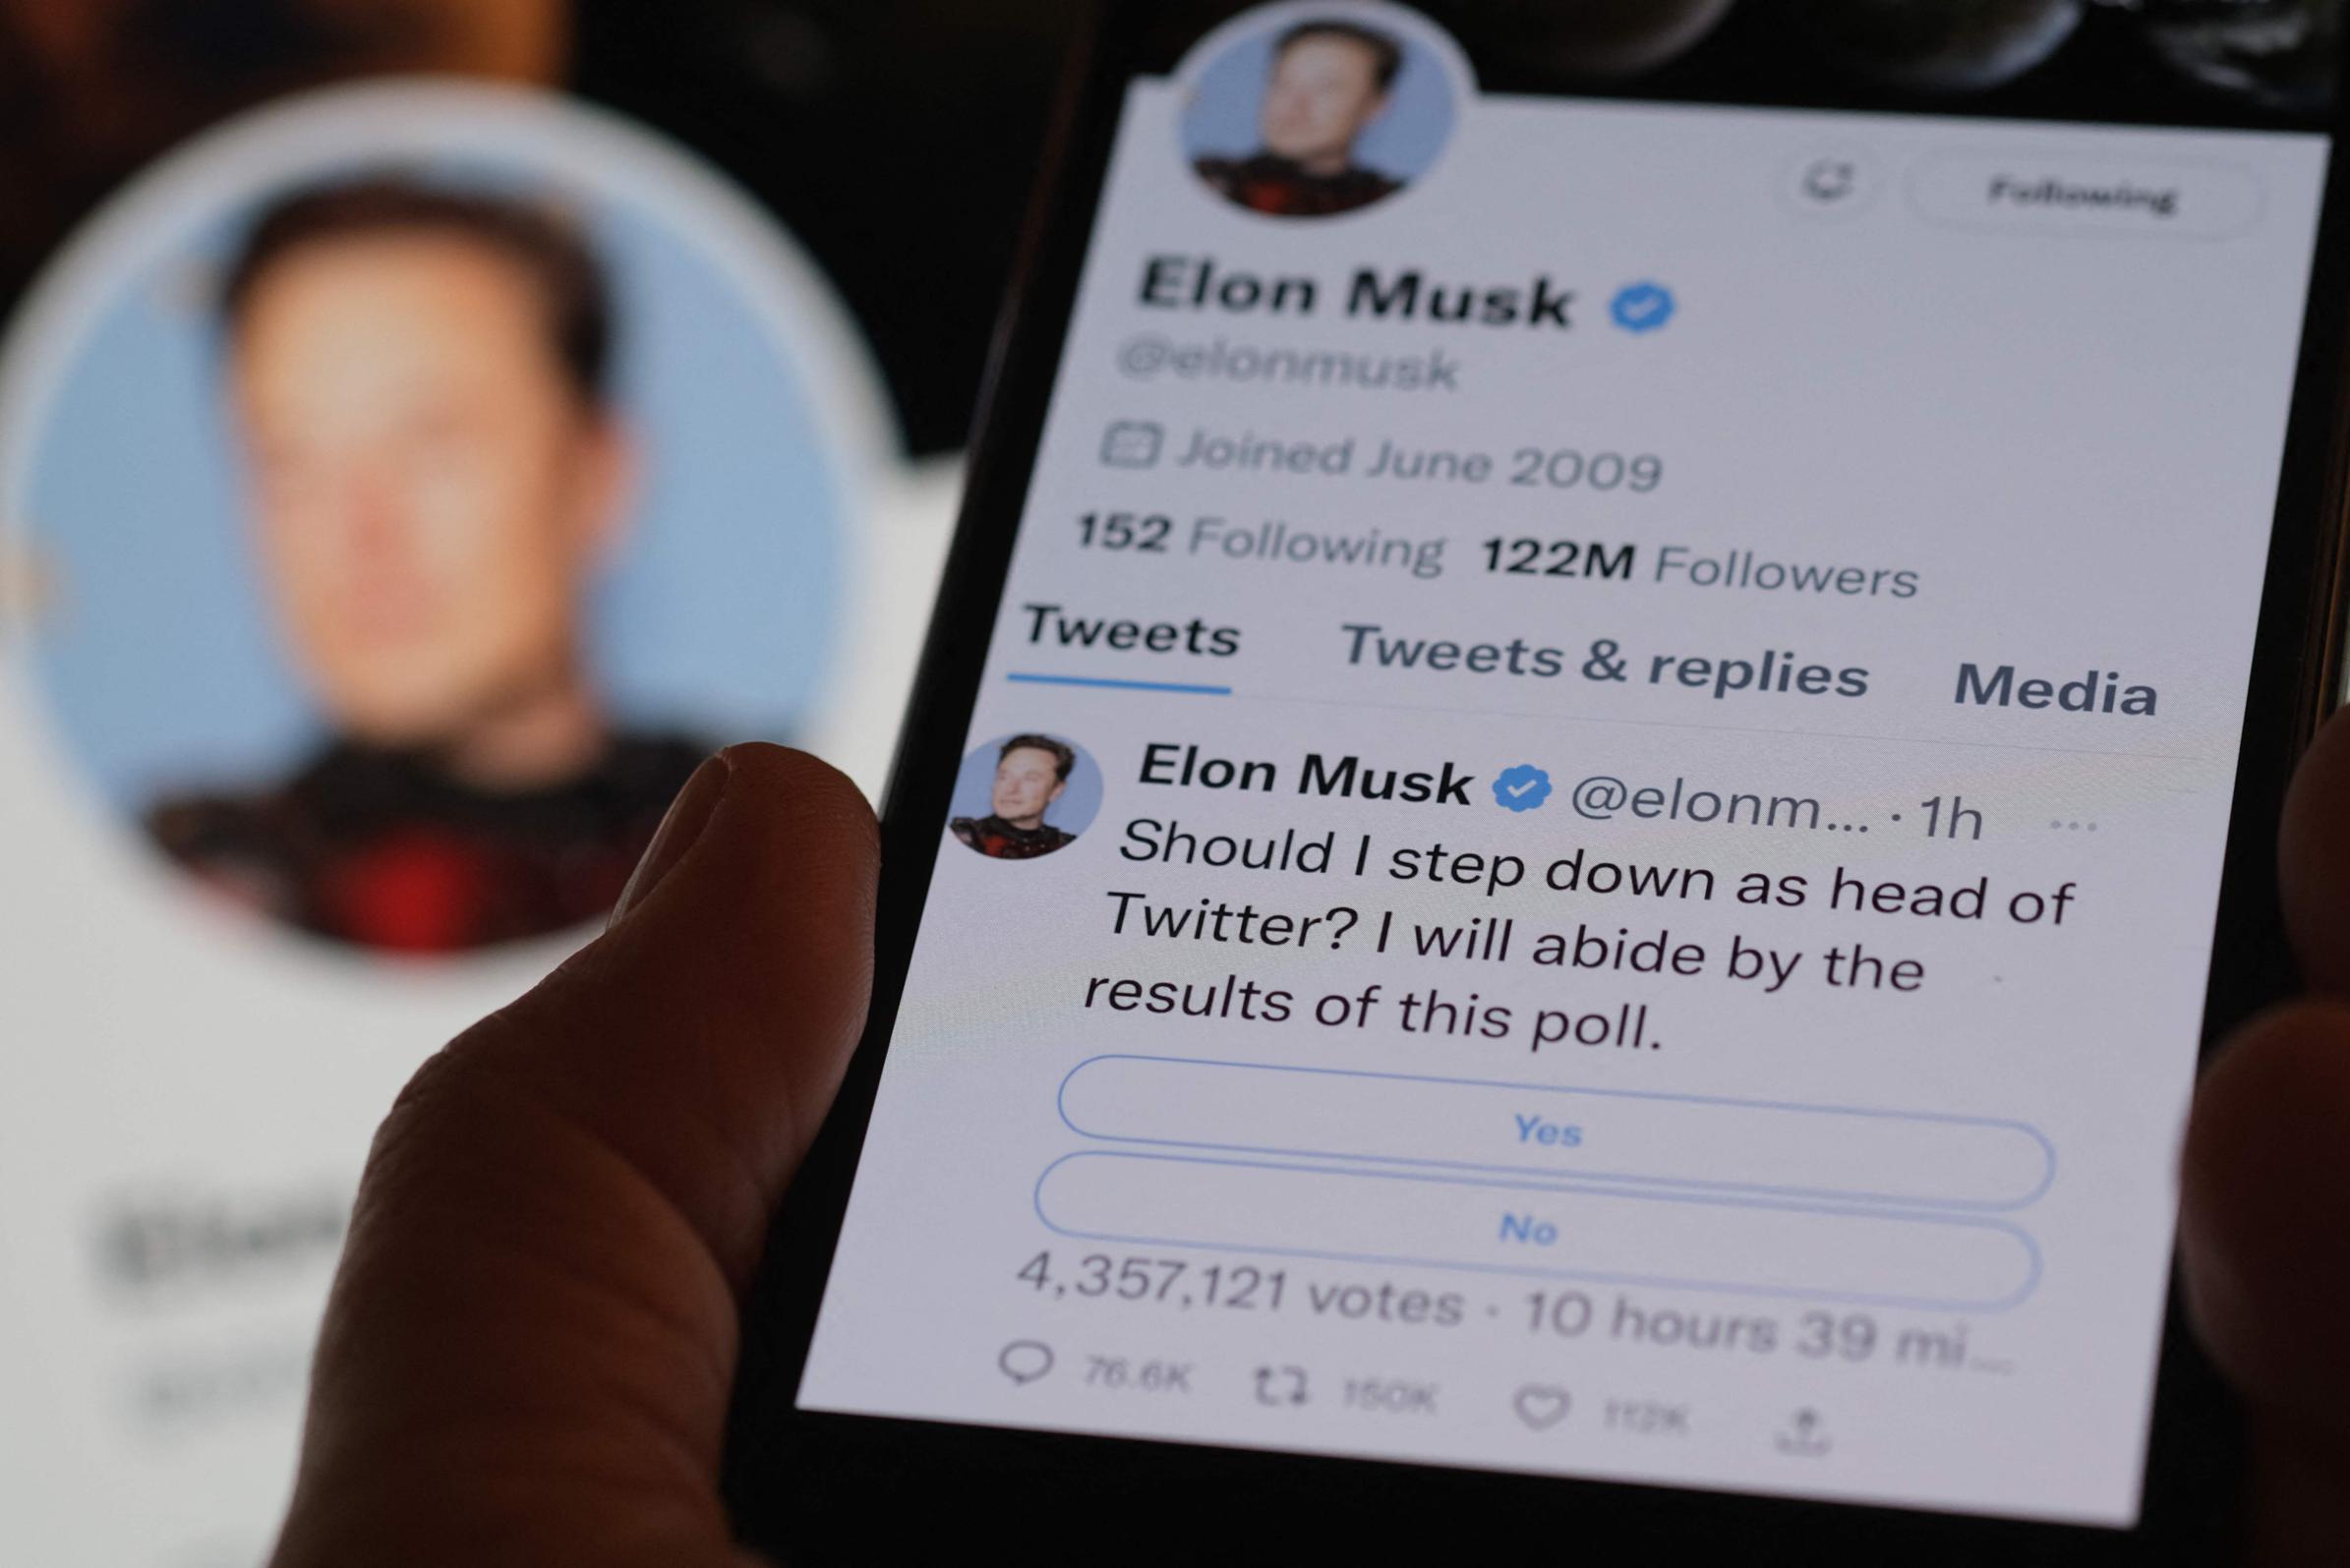 Elon Musk loses poll and has to leave the majority of Twitter users: does he put his money where his mouth is?